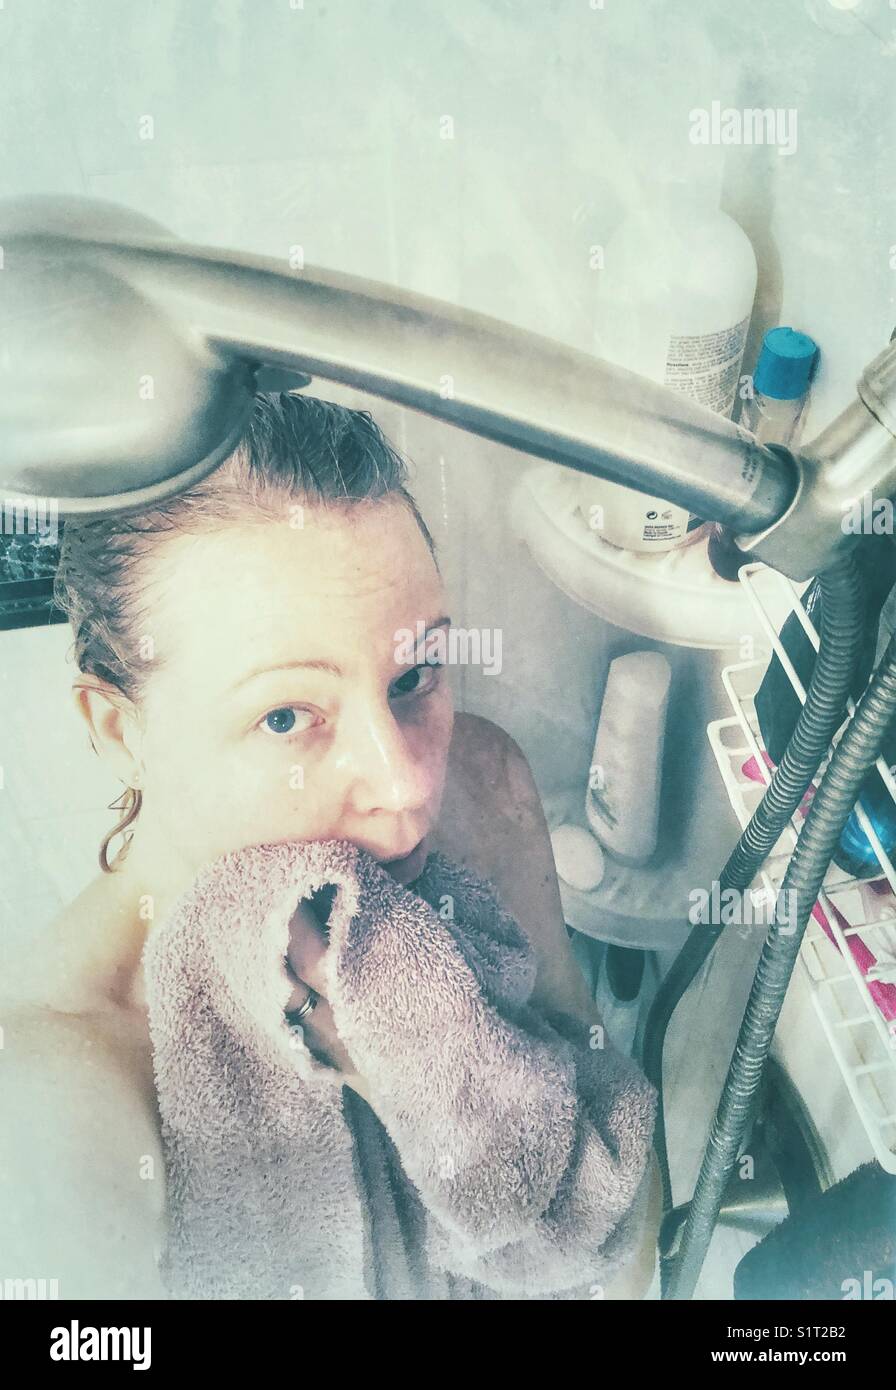 Looking down at woman in steamy shower stall holding towel Stock Photo